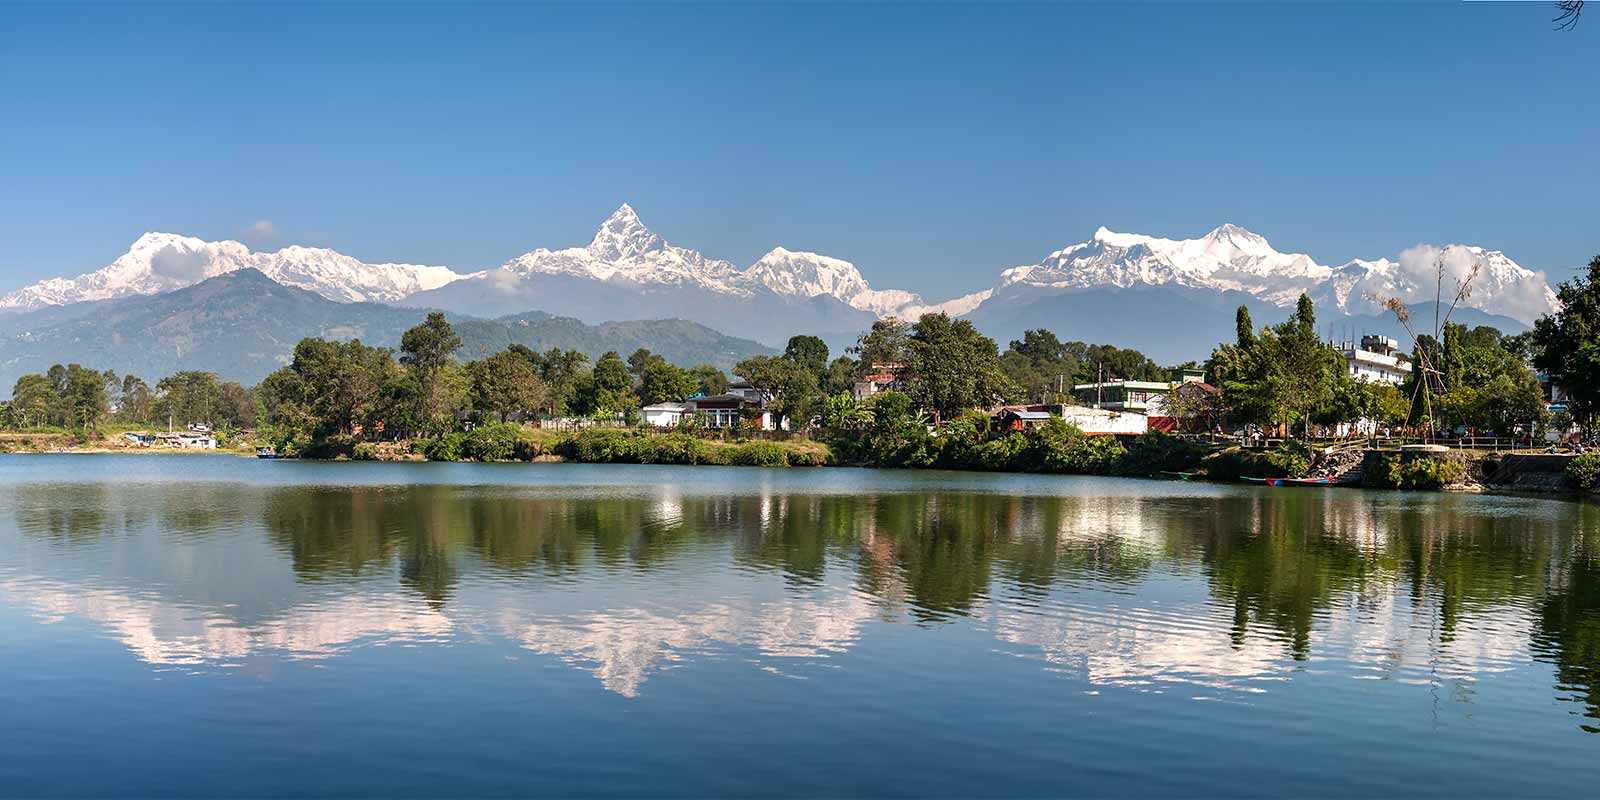 Phewa Lake with snow-capped Himalayas in the background